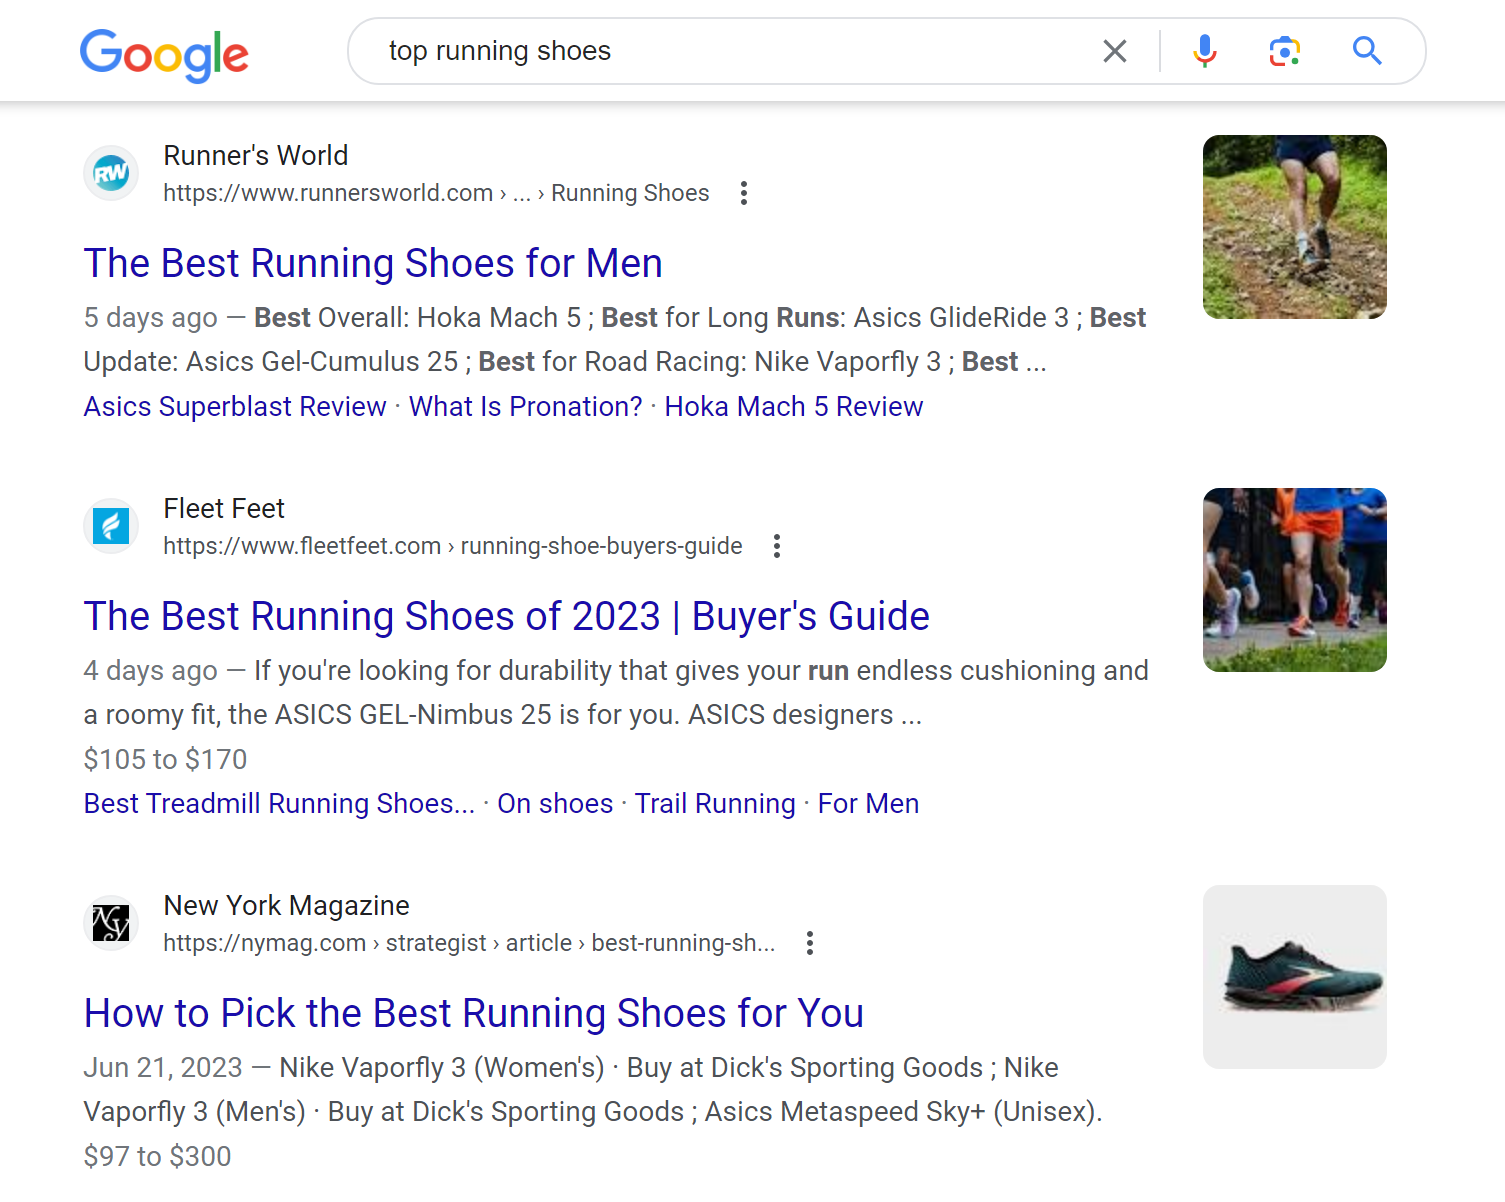 A SERP for running shoes.